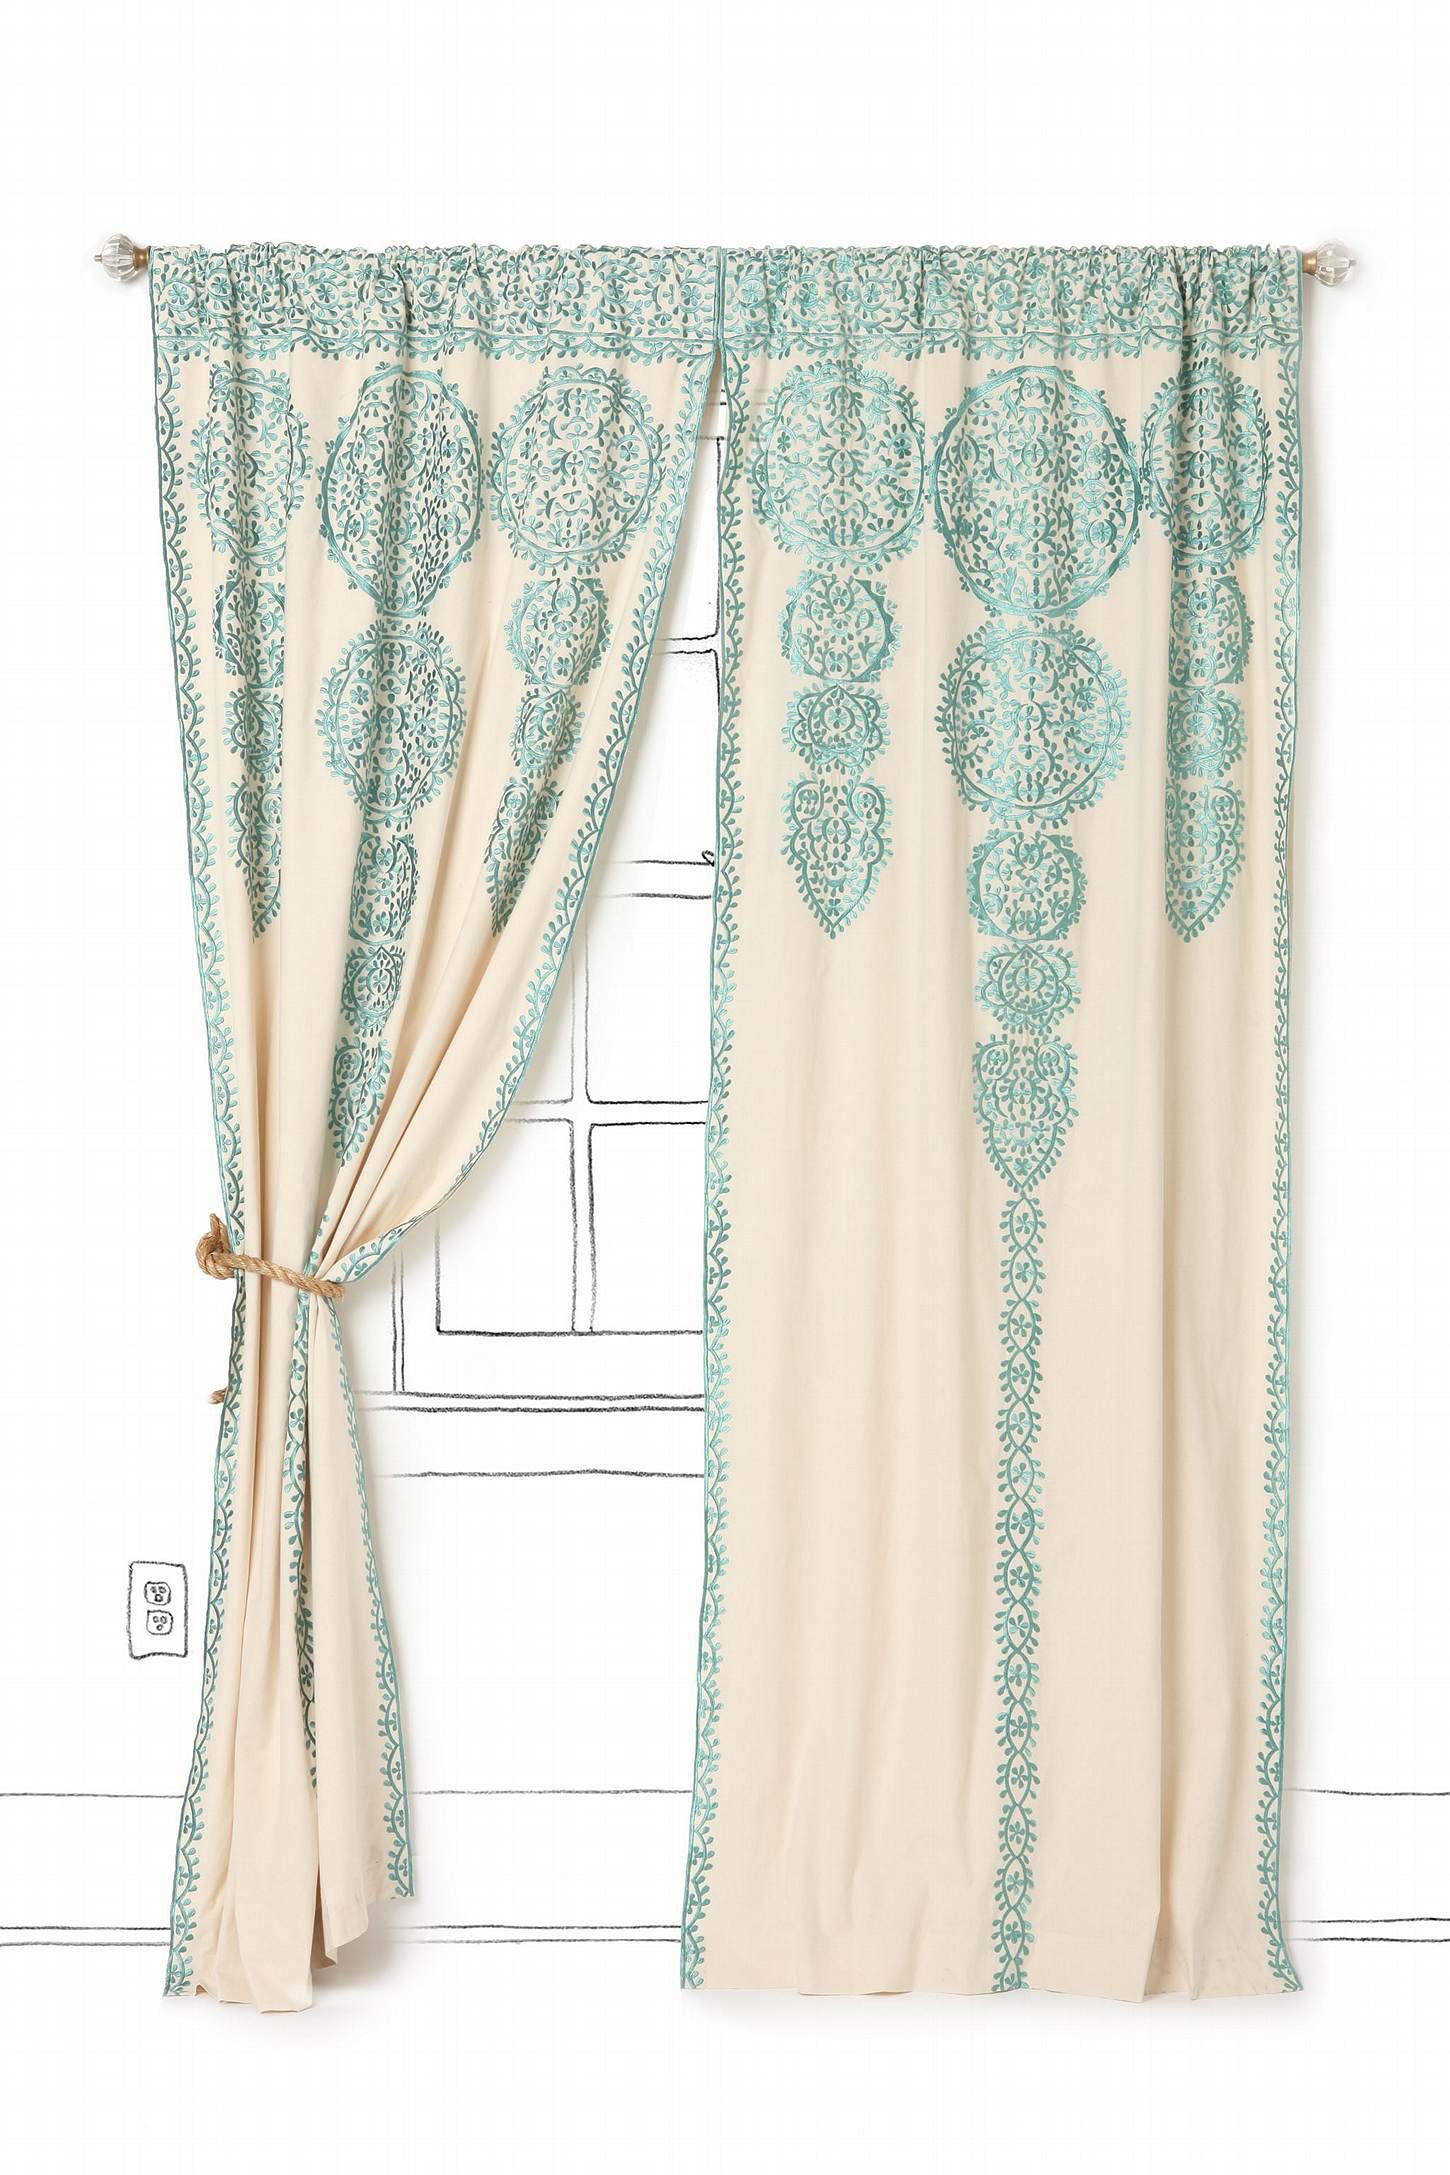 Moroccan curtains – could use same stencil in a different color that you end up